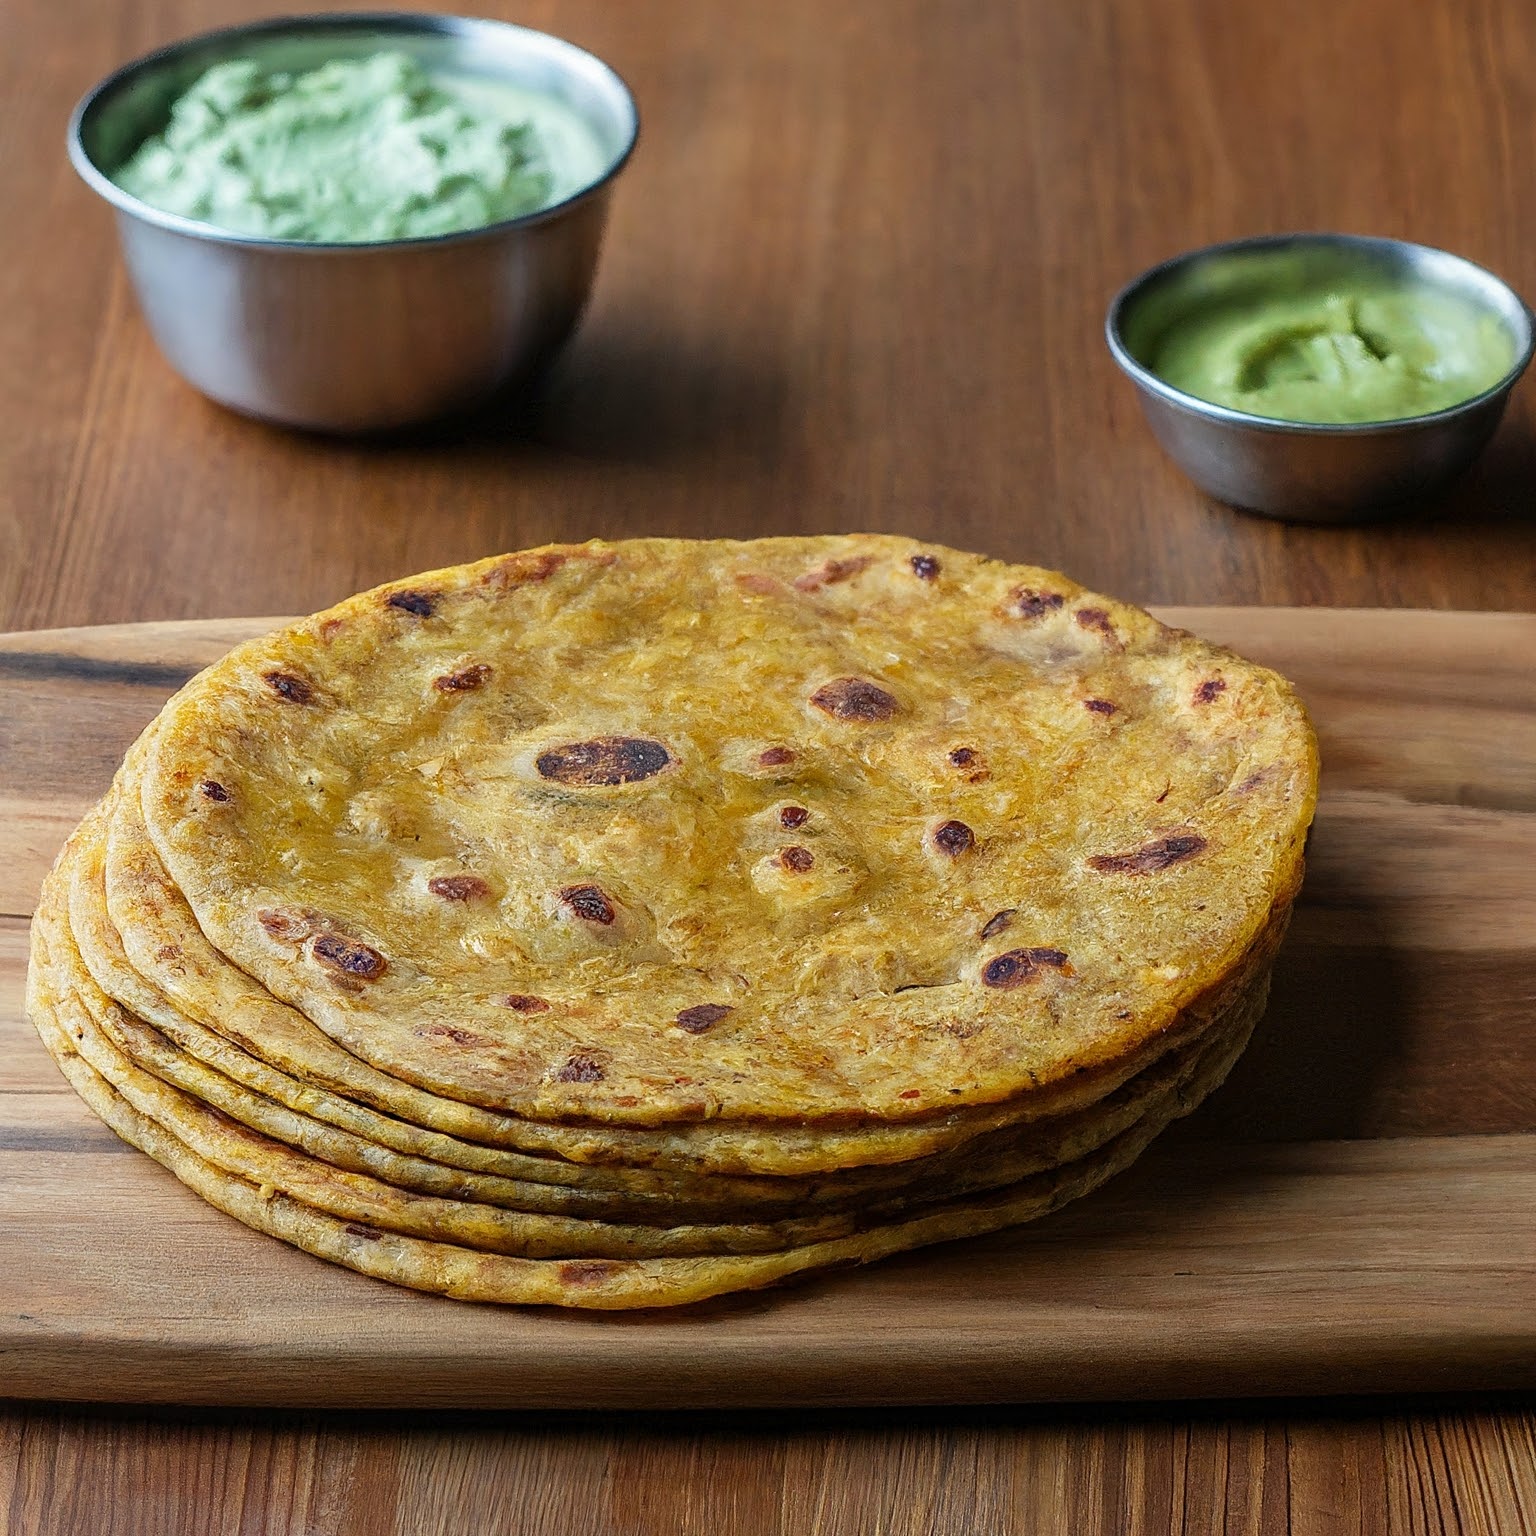 A golden brown thepla, a flatbread from Gujarat, India, with flecks of fresh fenugreek leaves